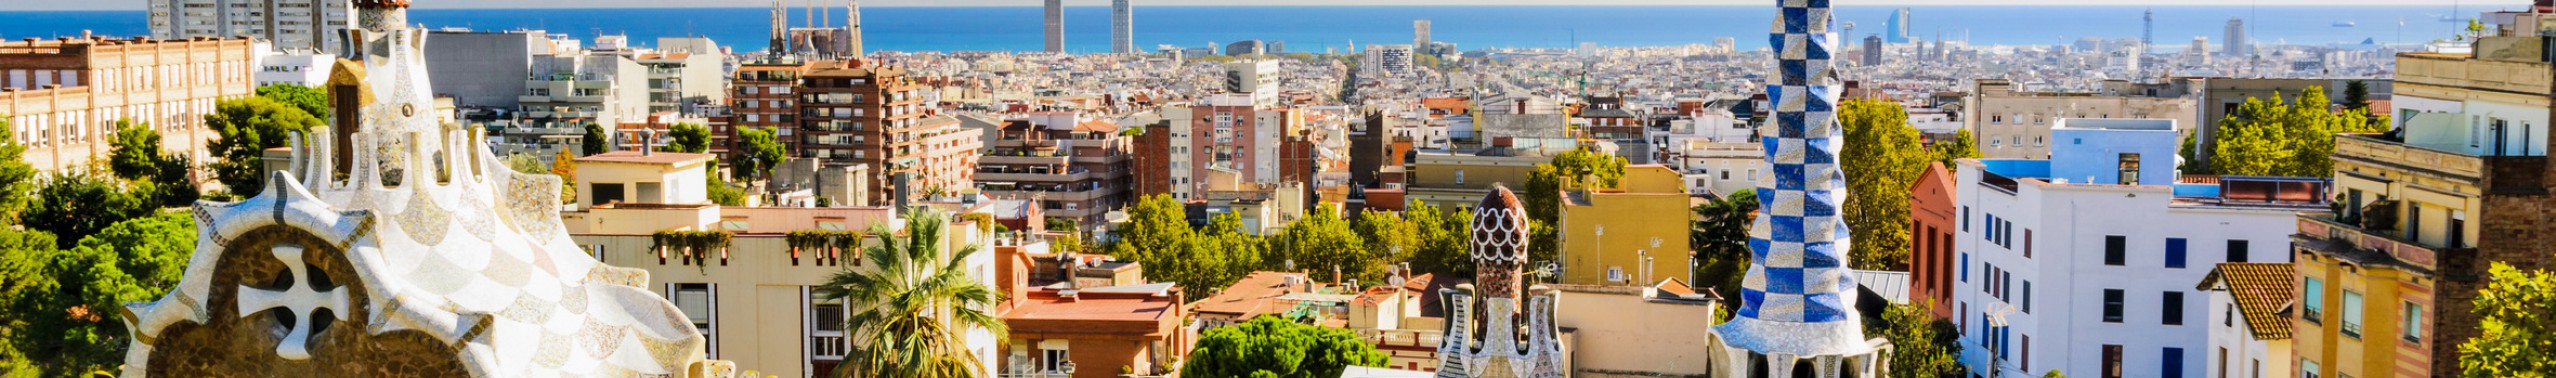 IFABS 2016 Barcelona Conference 1-2 June, 2016 